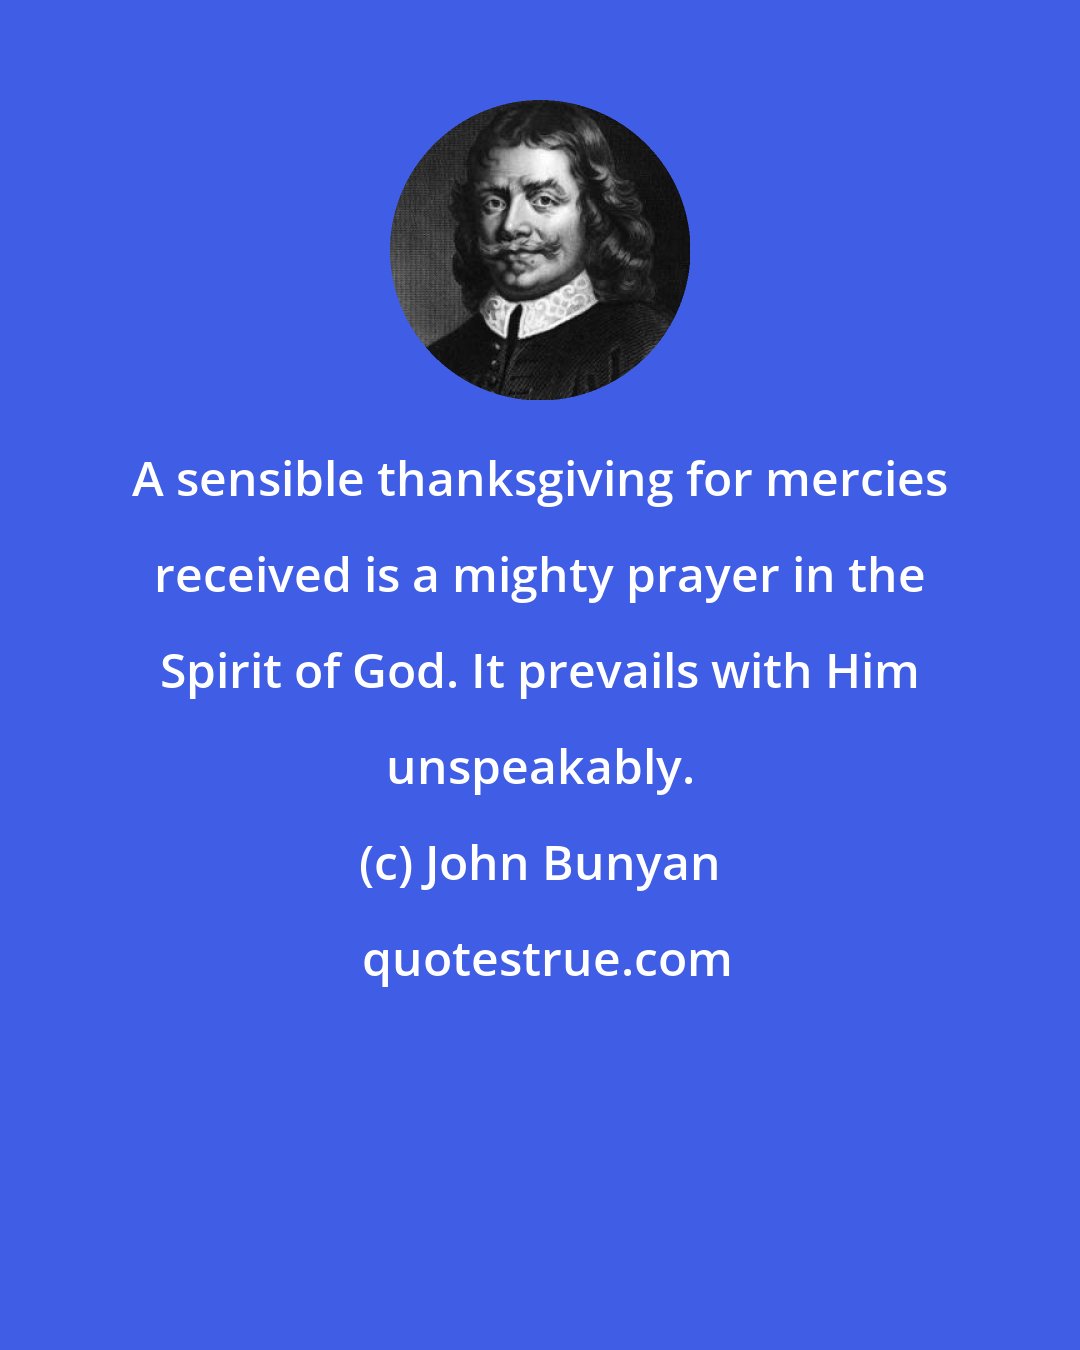 John Bunyan: A sensible thanksgiving for mercies received is a mighty prayer in the Spirit of God. It prevails with Him unspeakably.